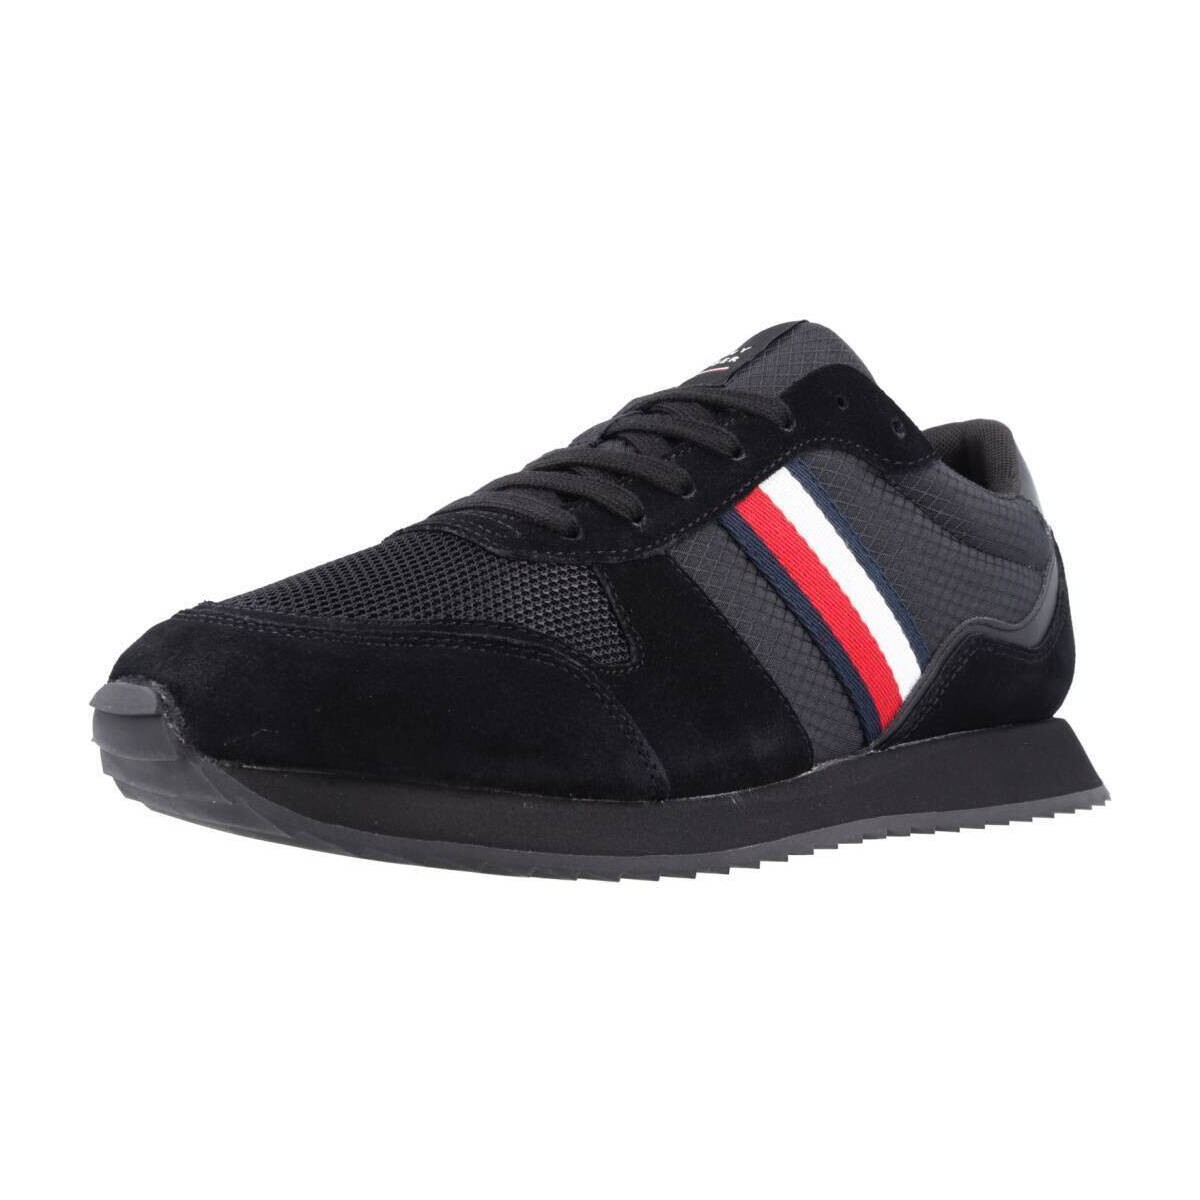 Sneakers Tommy Hilfiger RUNNER EVO MIX Black